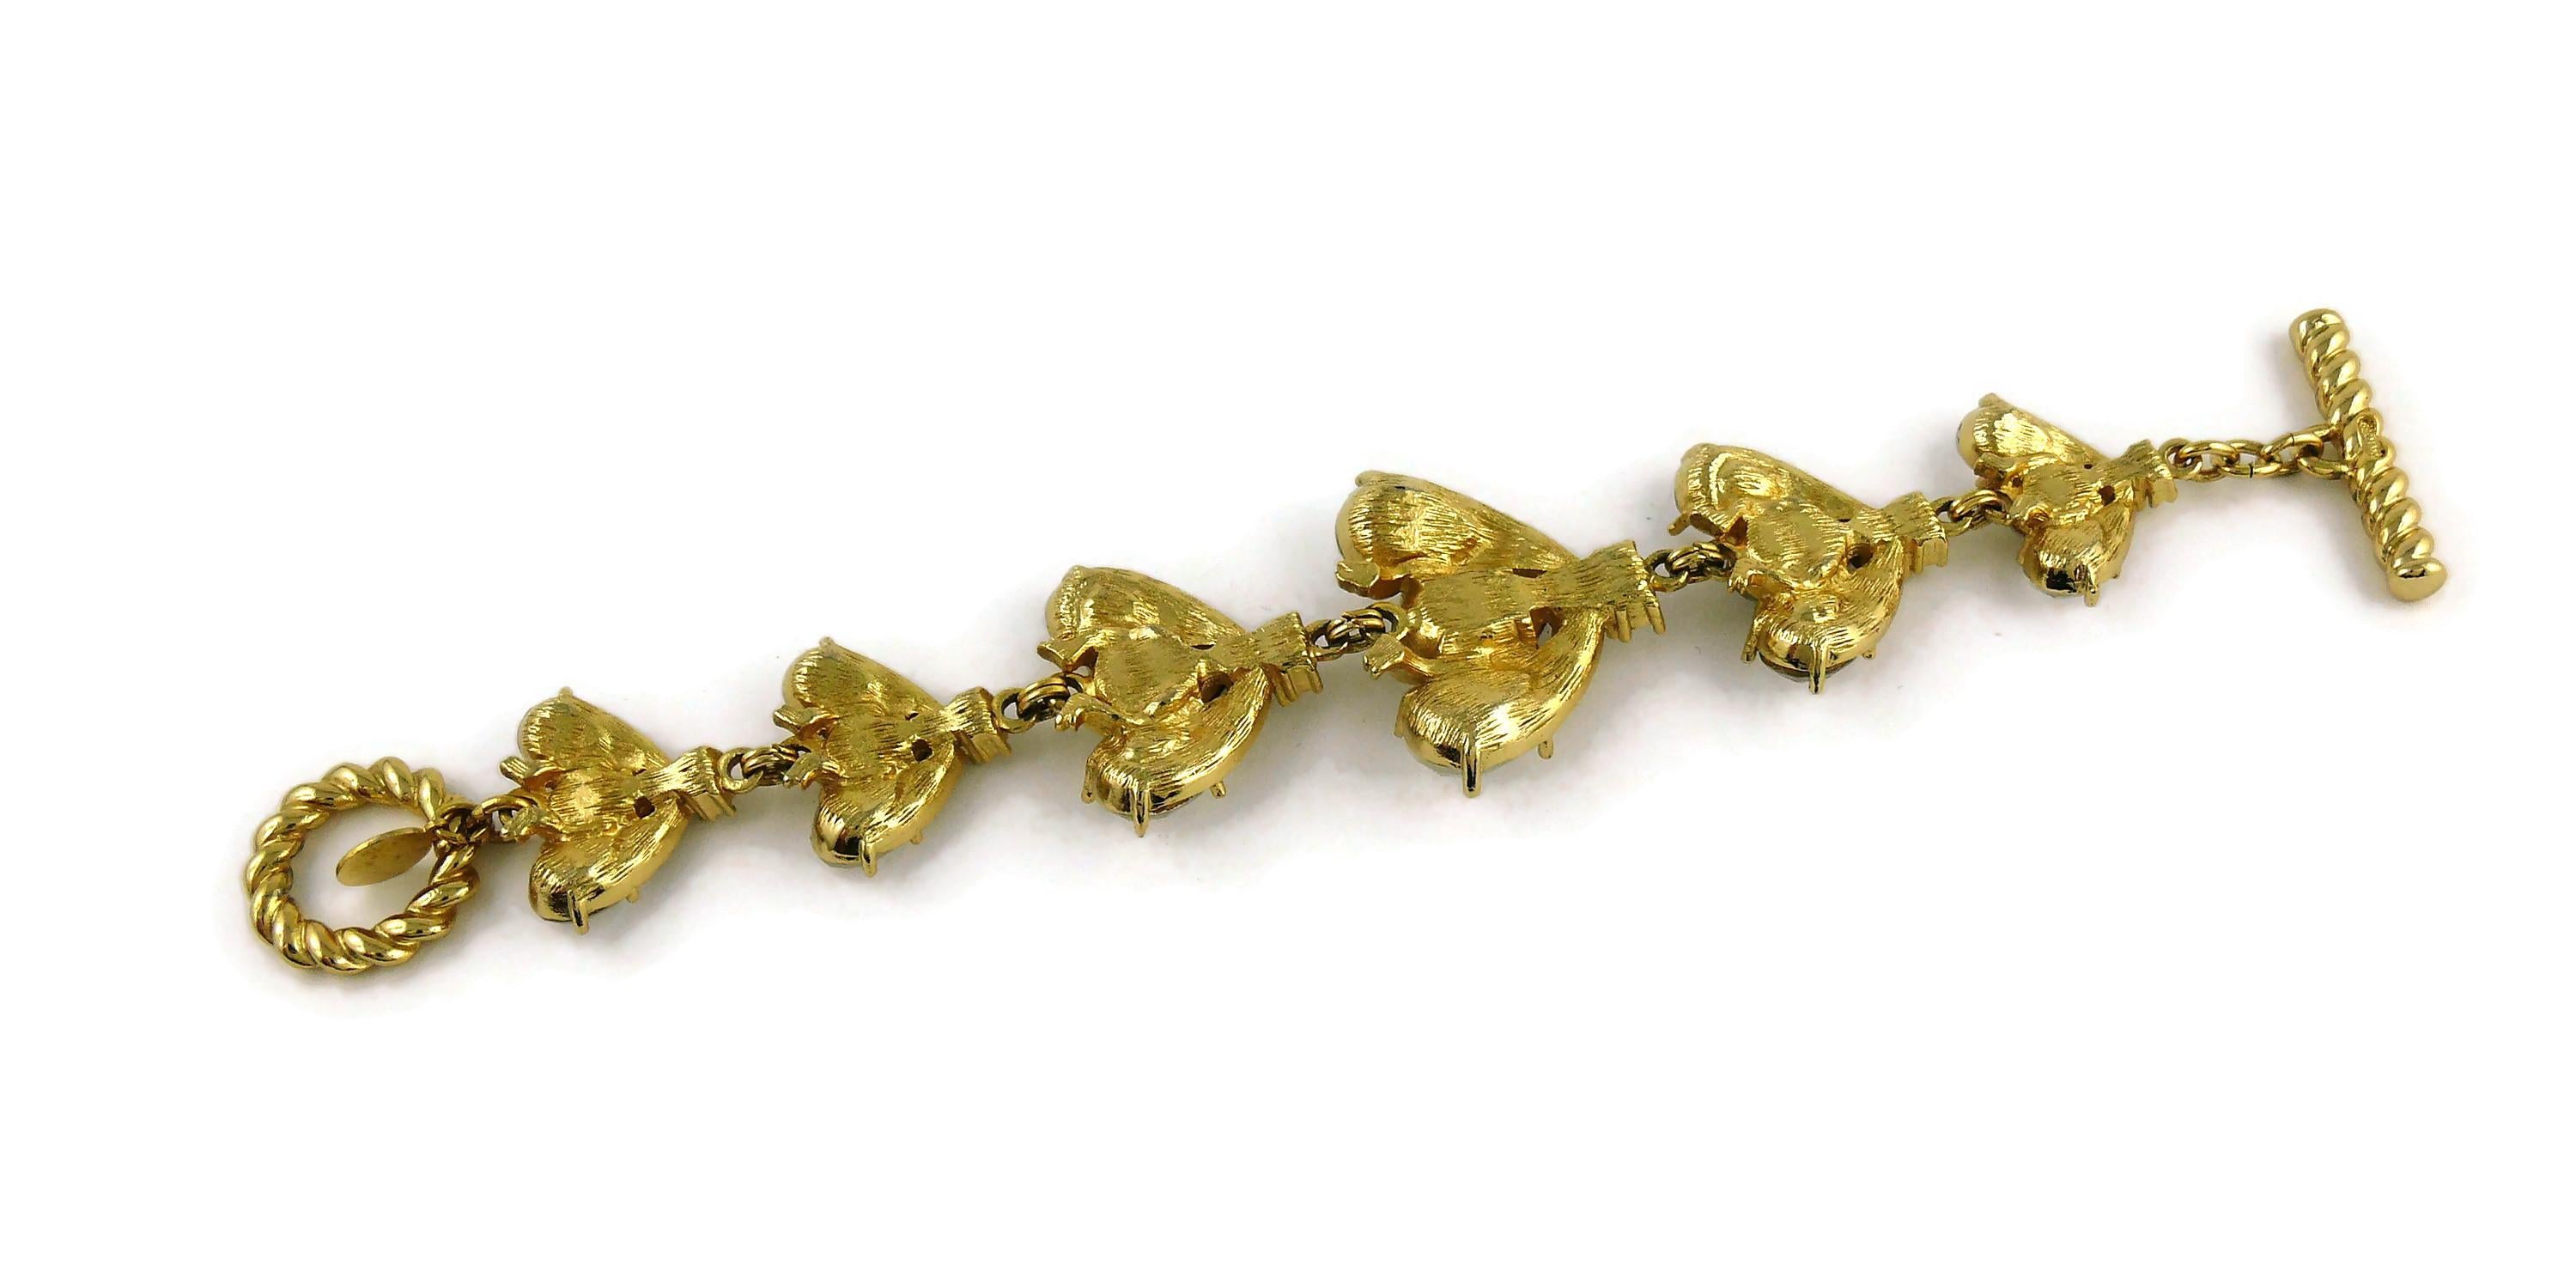 Christian Dior Boutique Vintage Iconic Jewelled Bee Bracelet 4